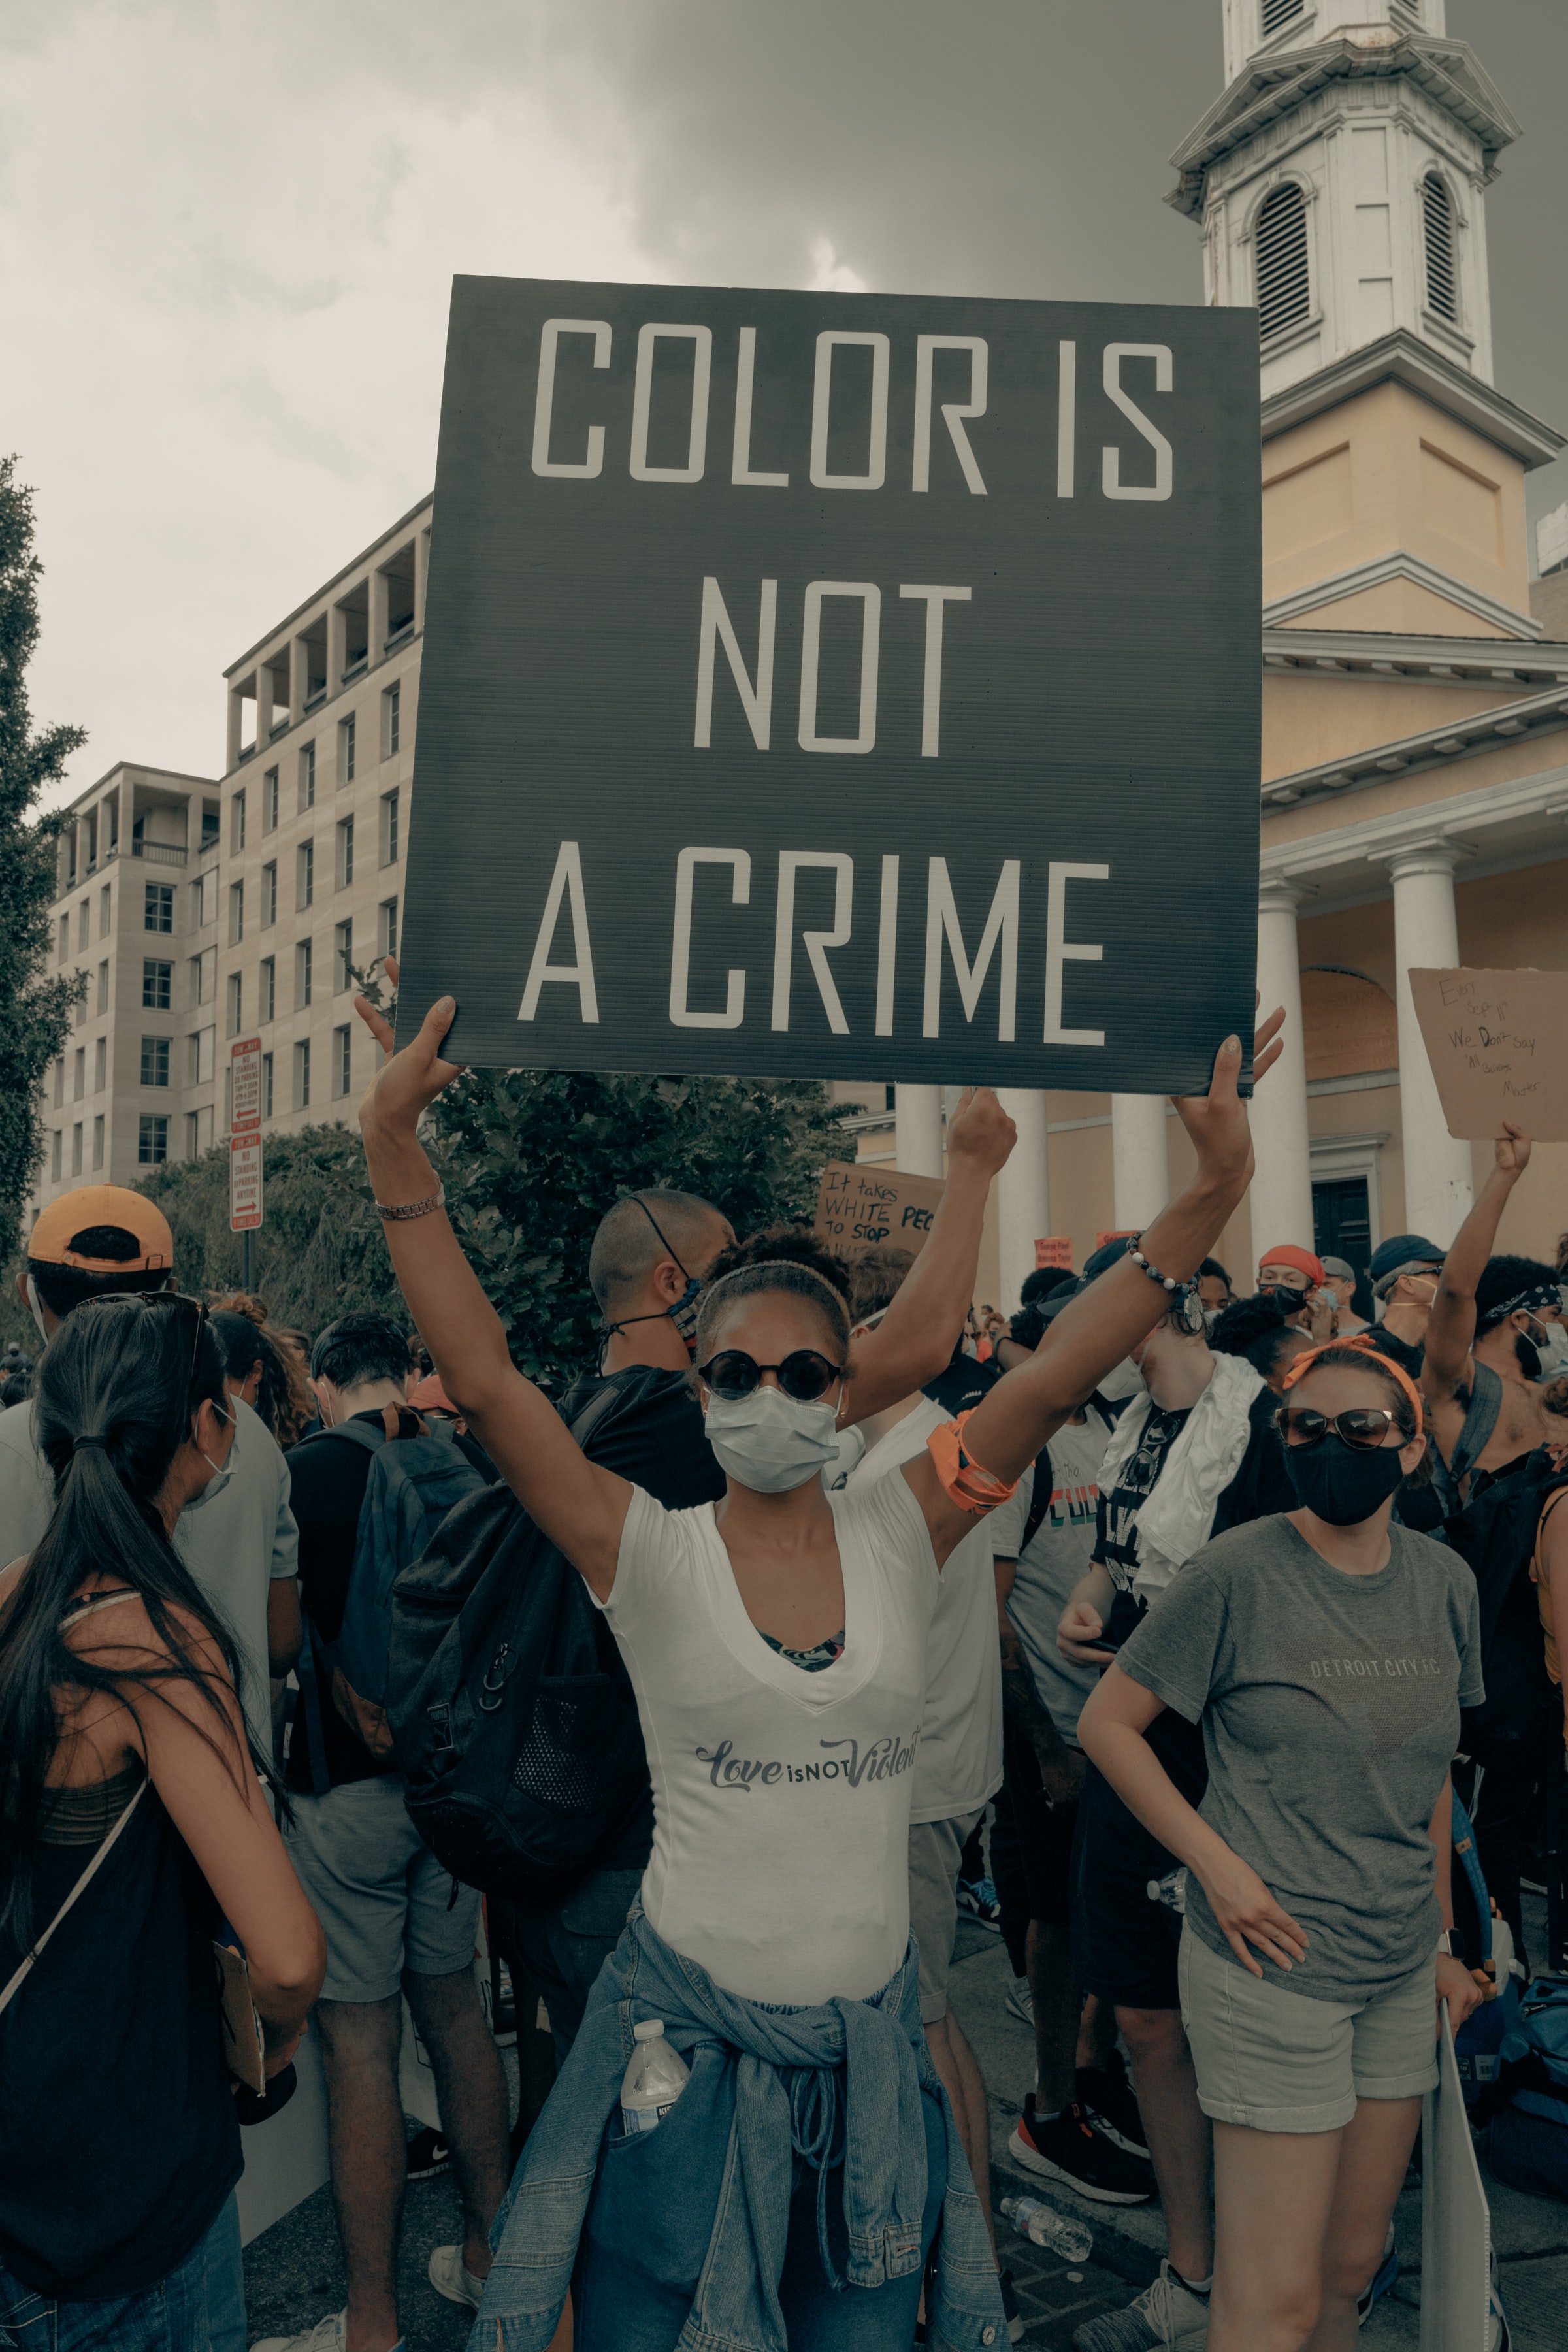 A person holds up sign ("Color is not a crime") at the Black Lives Matter protest in Washington DC 